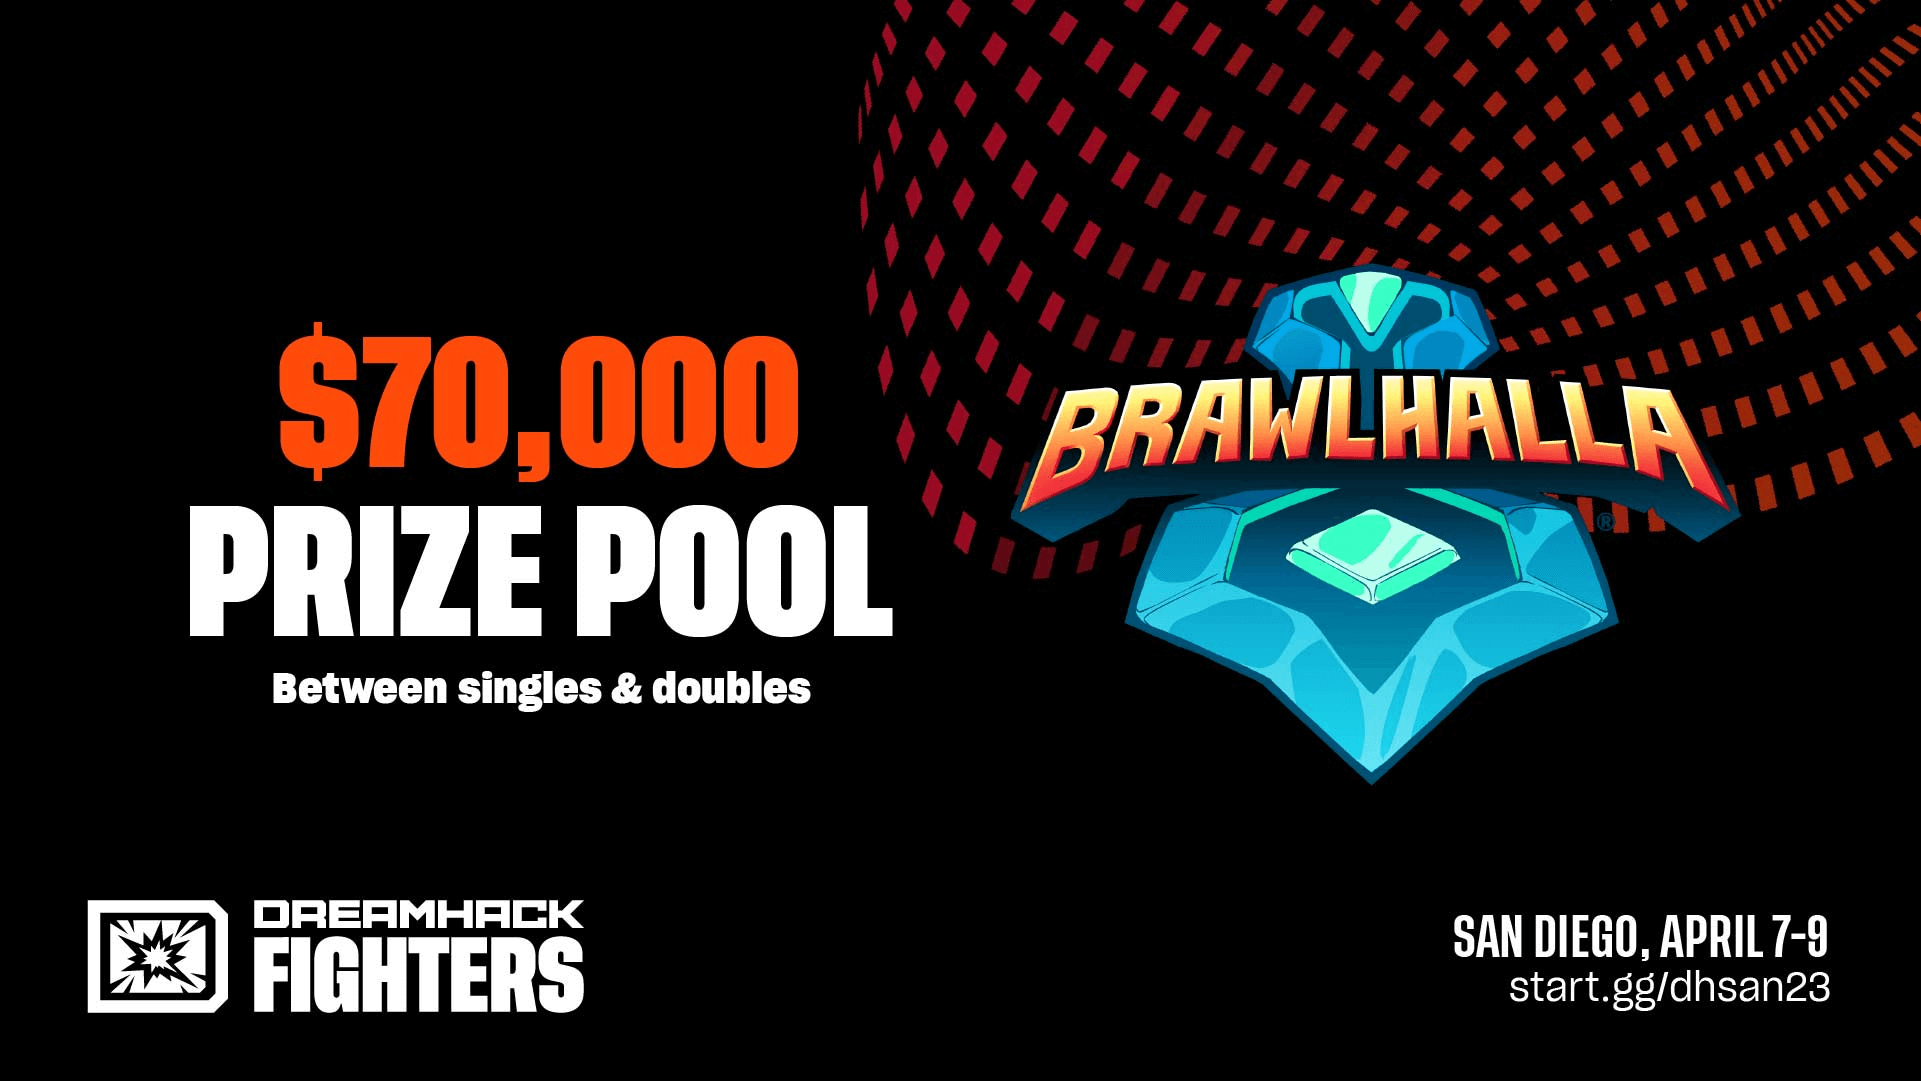 Brawlhalla Prize Pools are the Biggest at Dreamhack San Diego